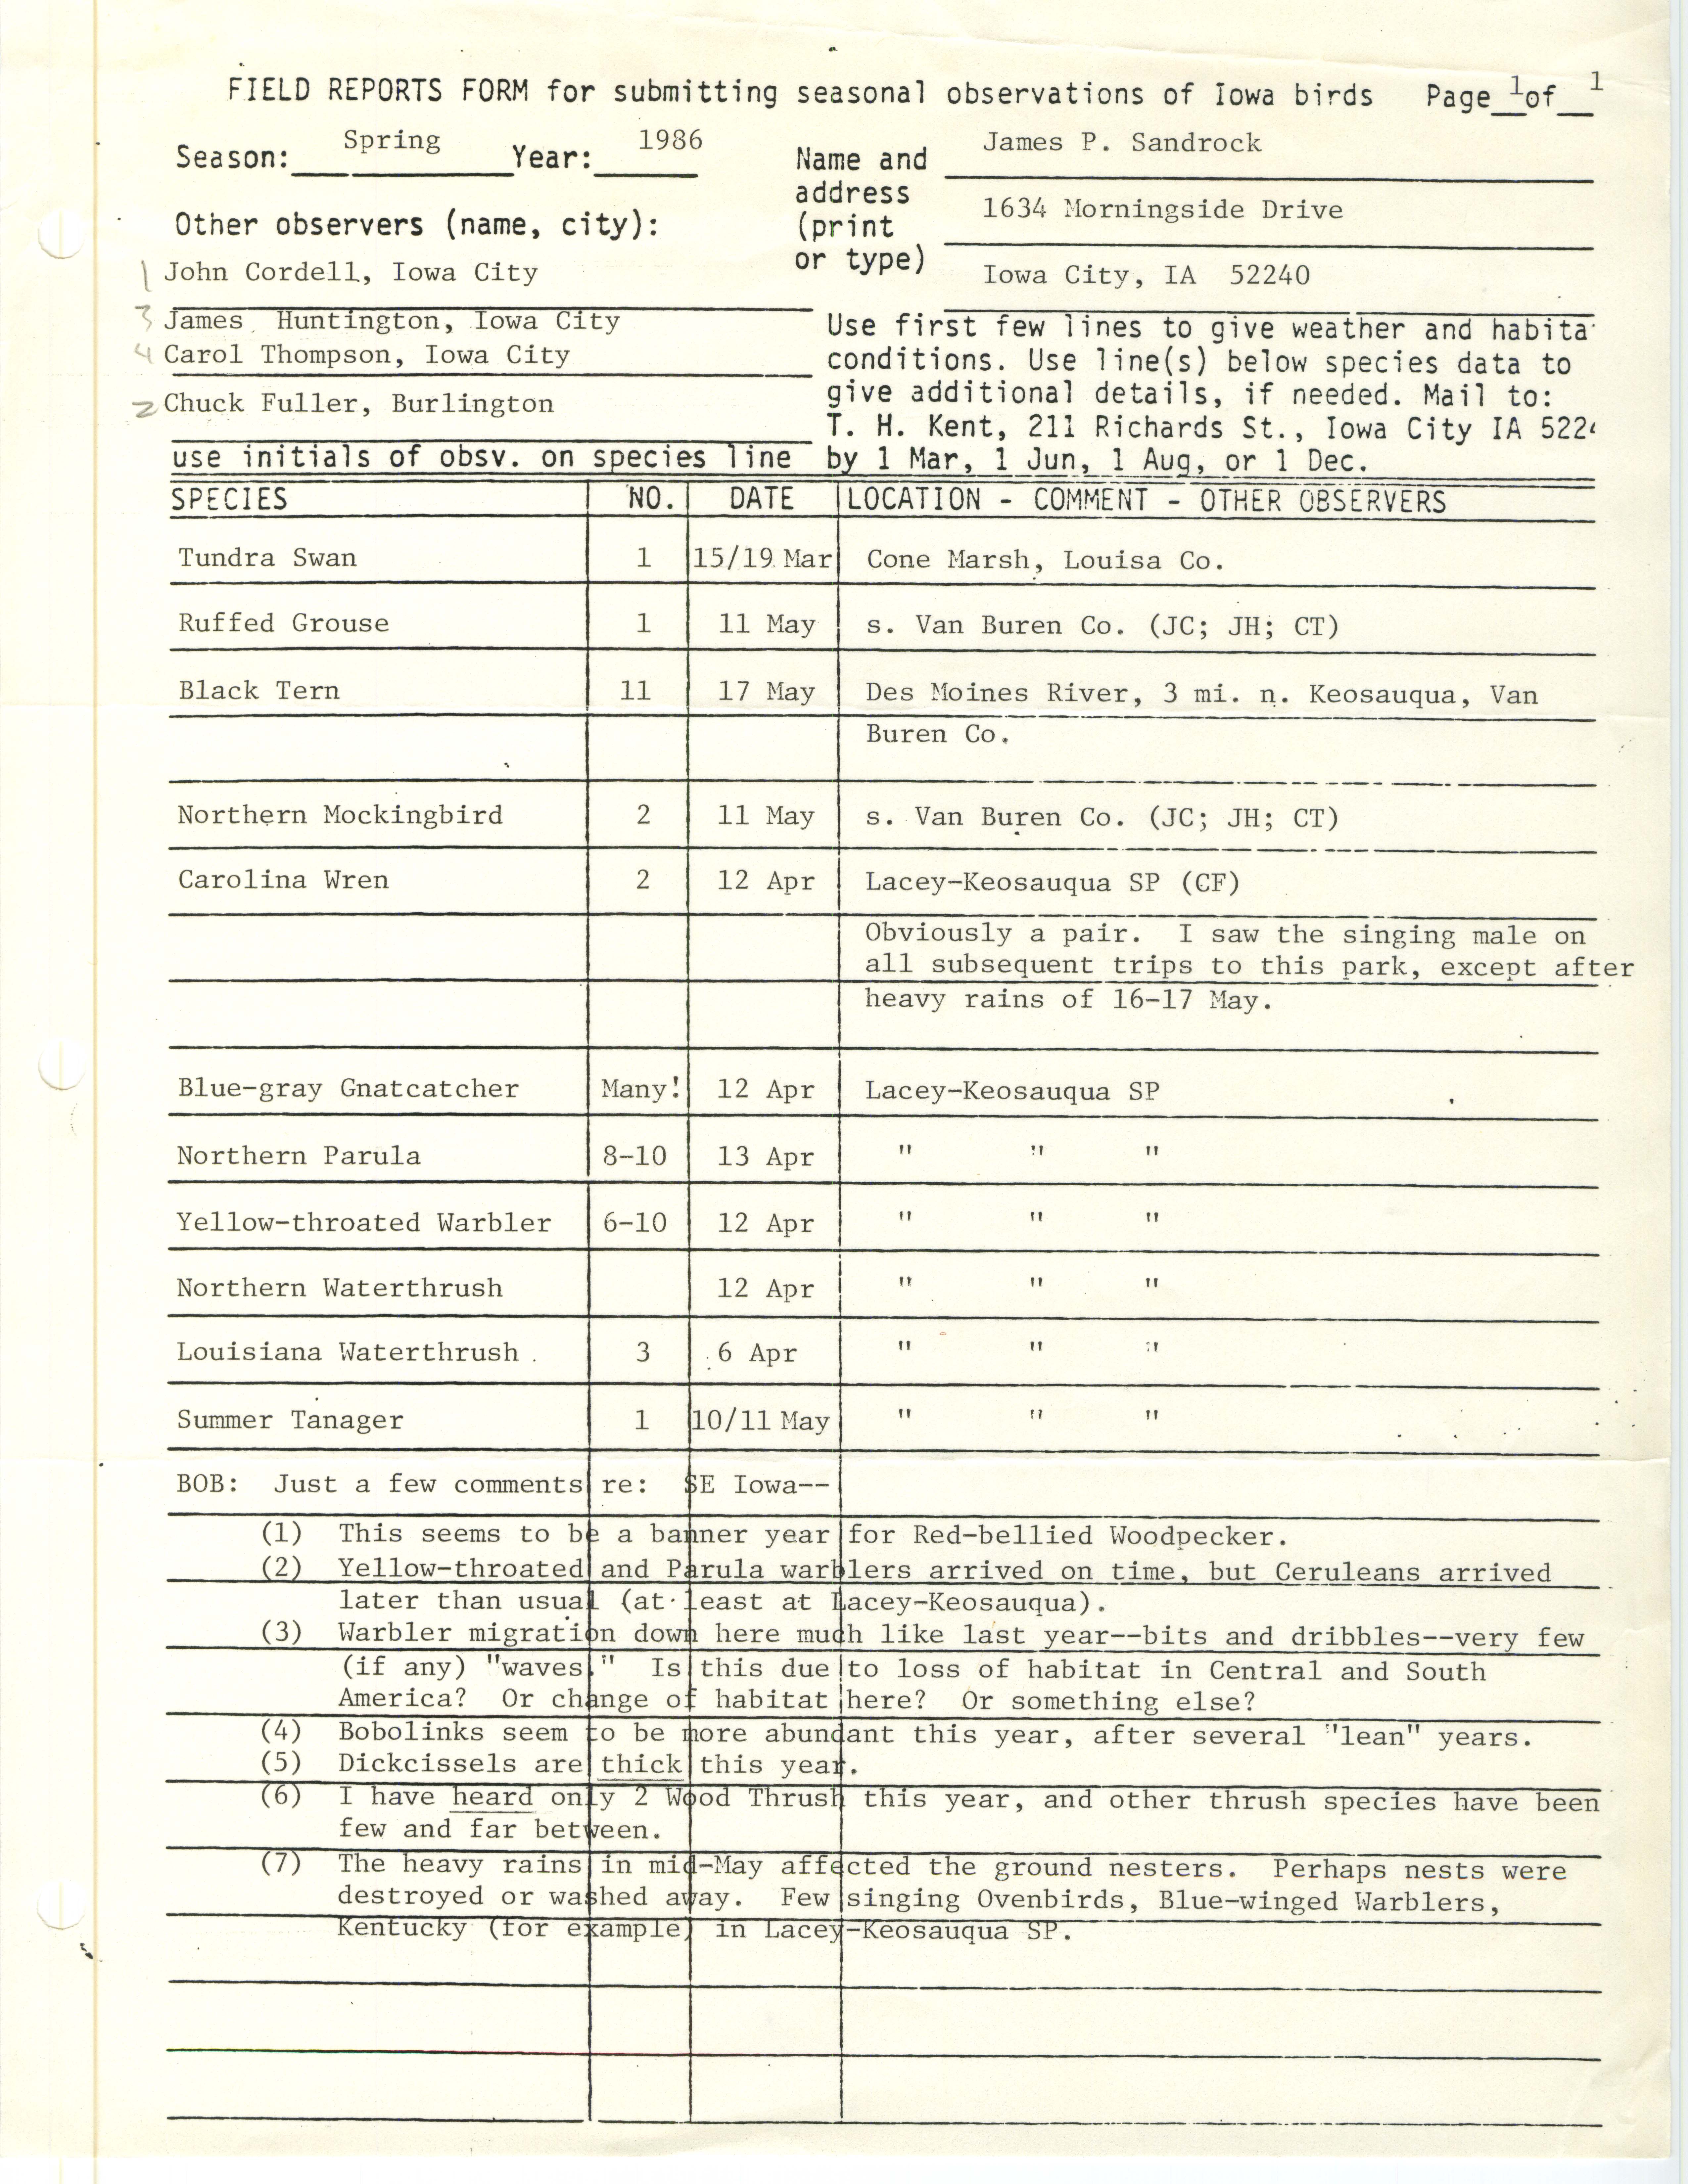 Field reports form for submitting seasonal observations of Iowa birds, James Sandrock, Spring 1986